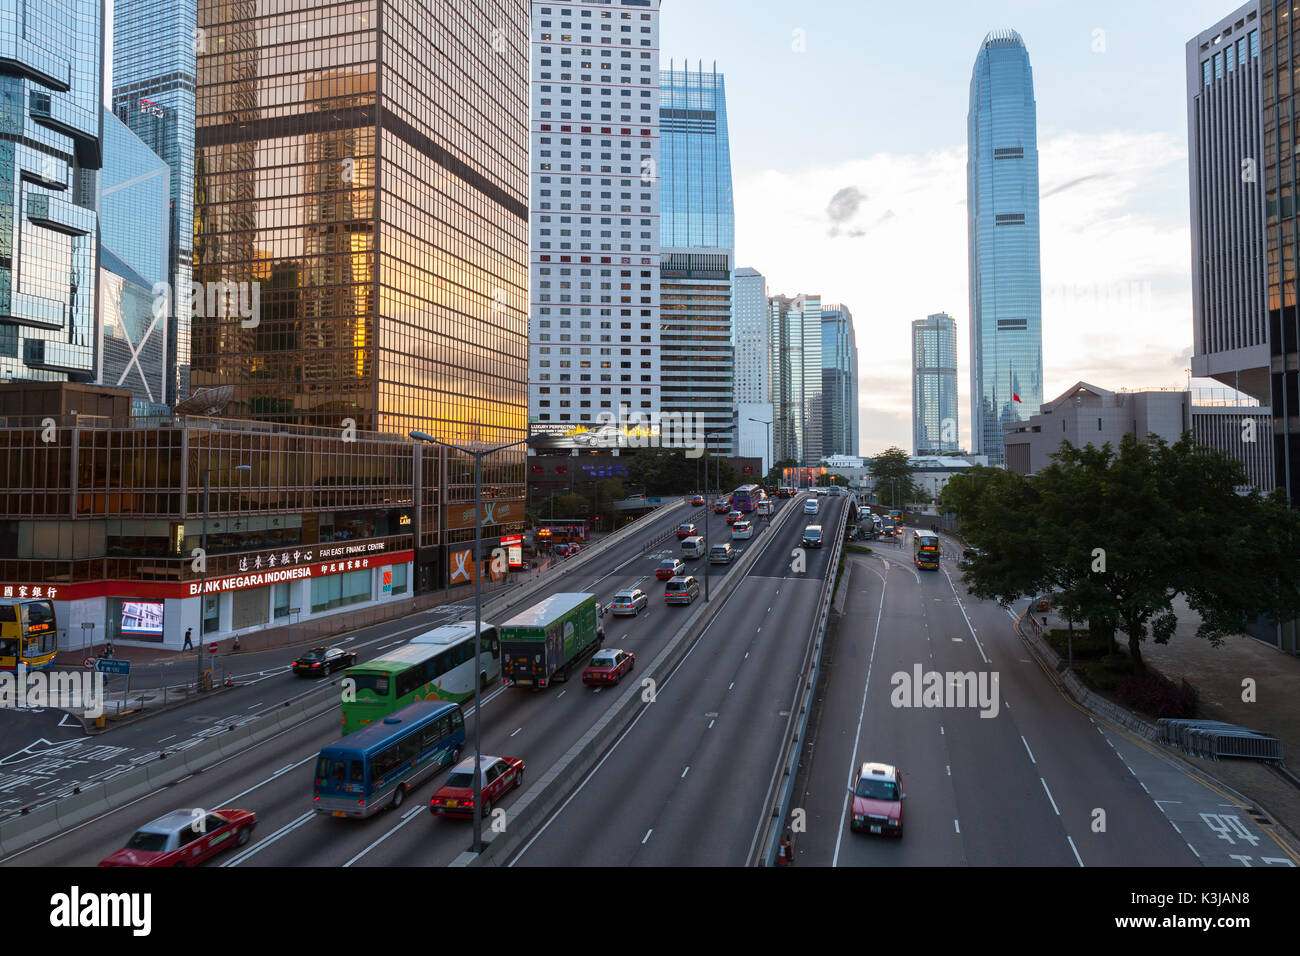 Hong Kong - July 11, 2017: Street view of Hong Kong city center. Connaught Rd Central perspective with IFC mall Stock Photo